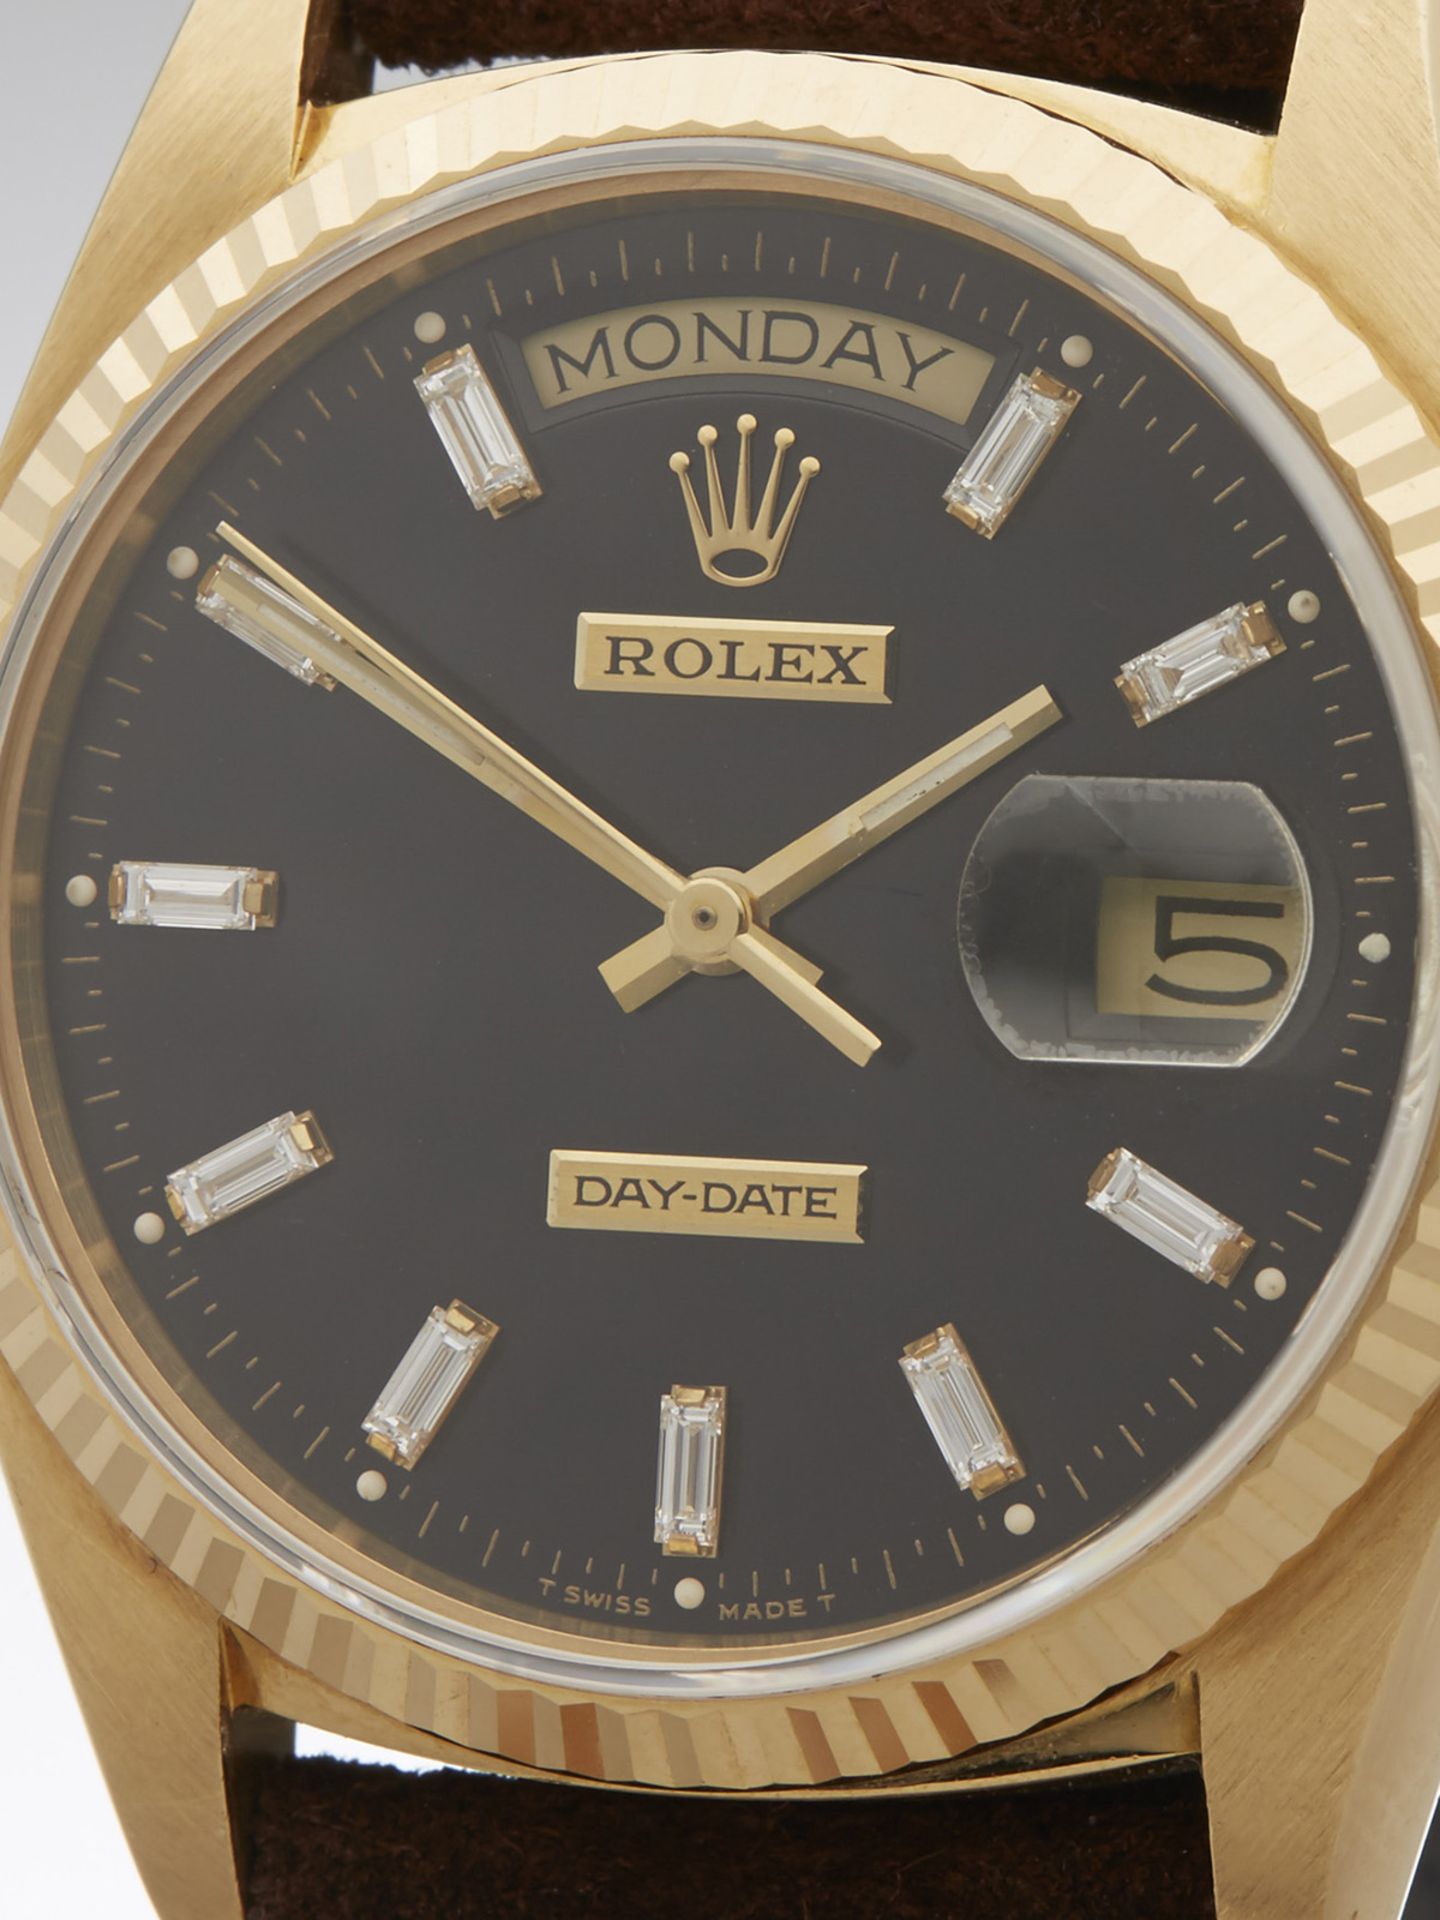 Rolex, Day-Date - Image 4 of 9